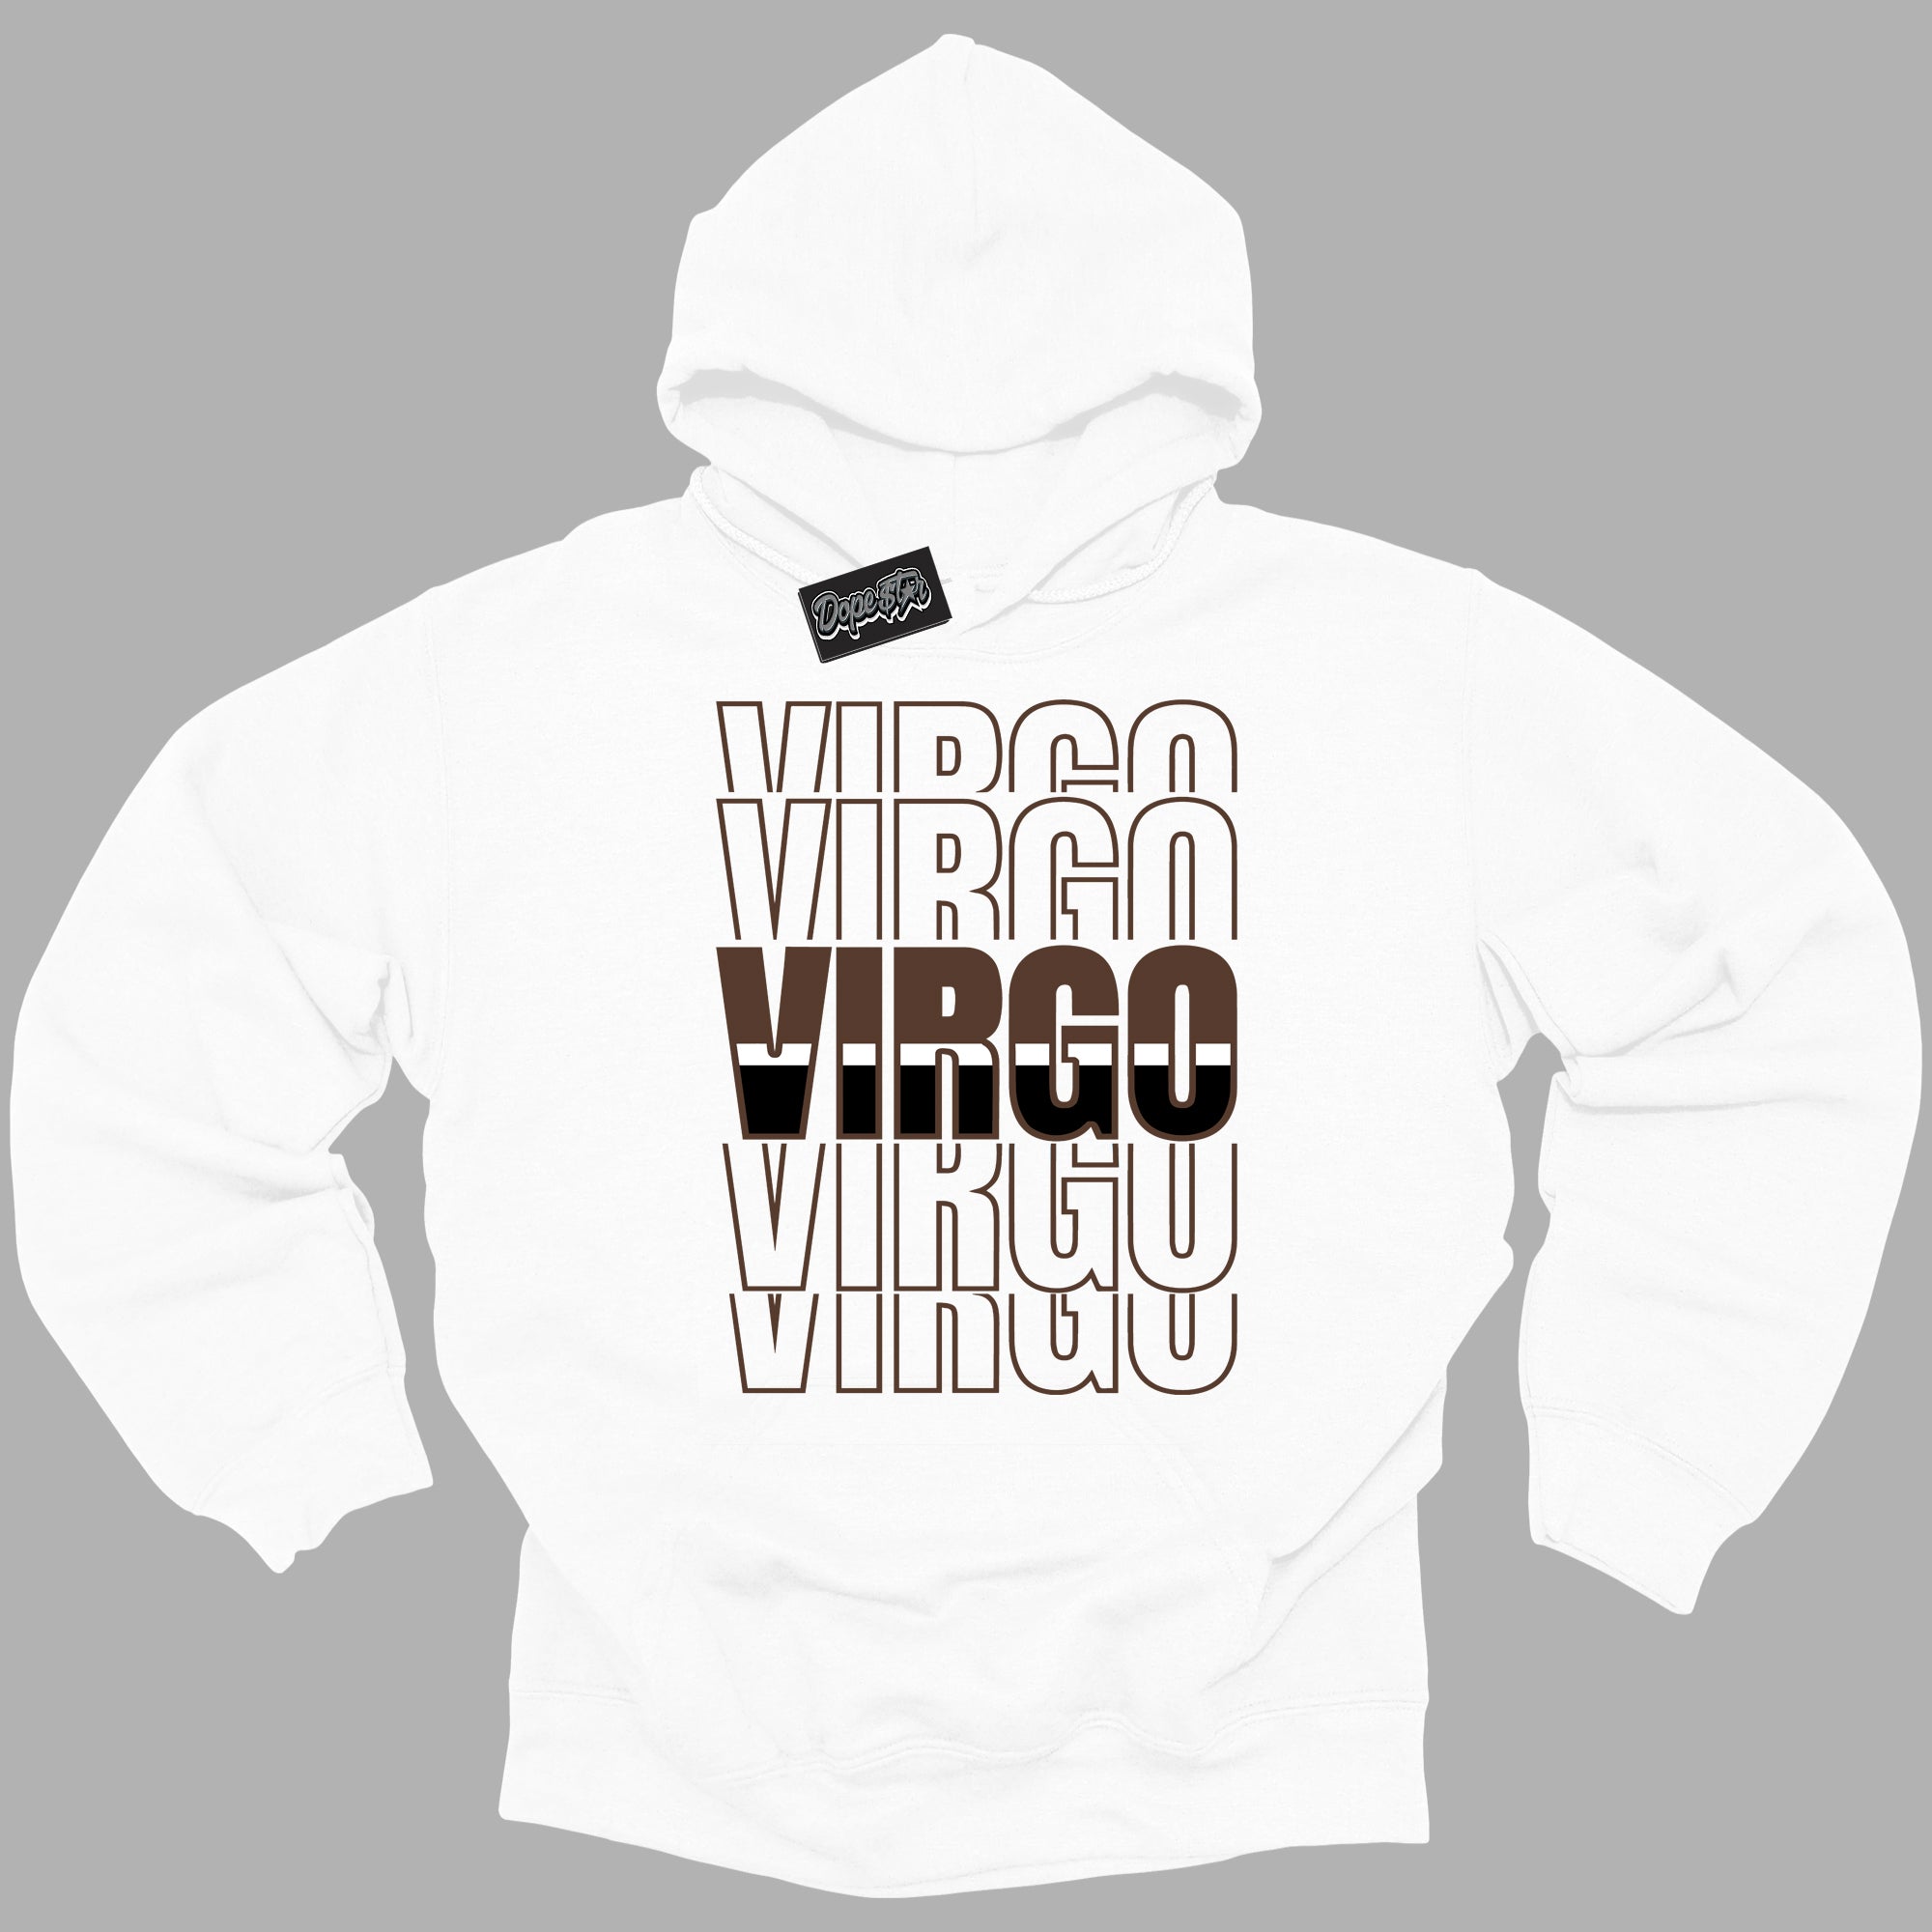 Cool White Graphic DopeStar Hoodie with “ Virgo “ print, that perfectly matches Palomino 1s sneakers